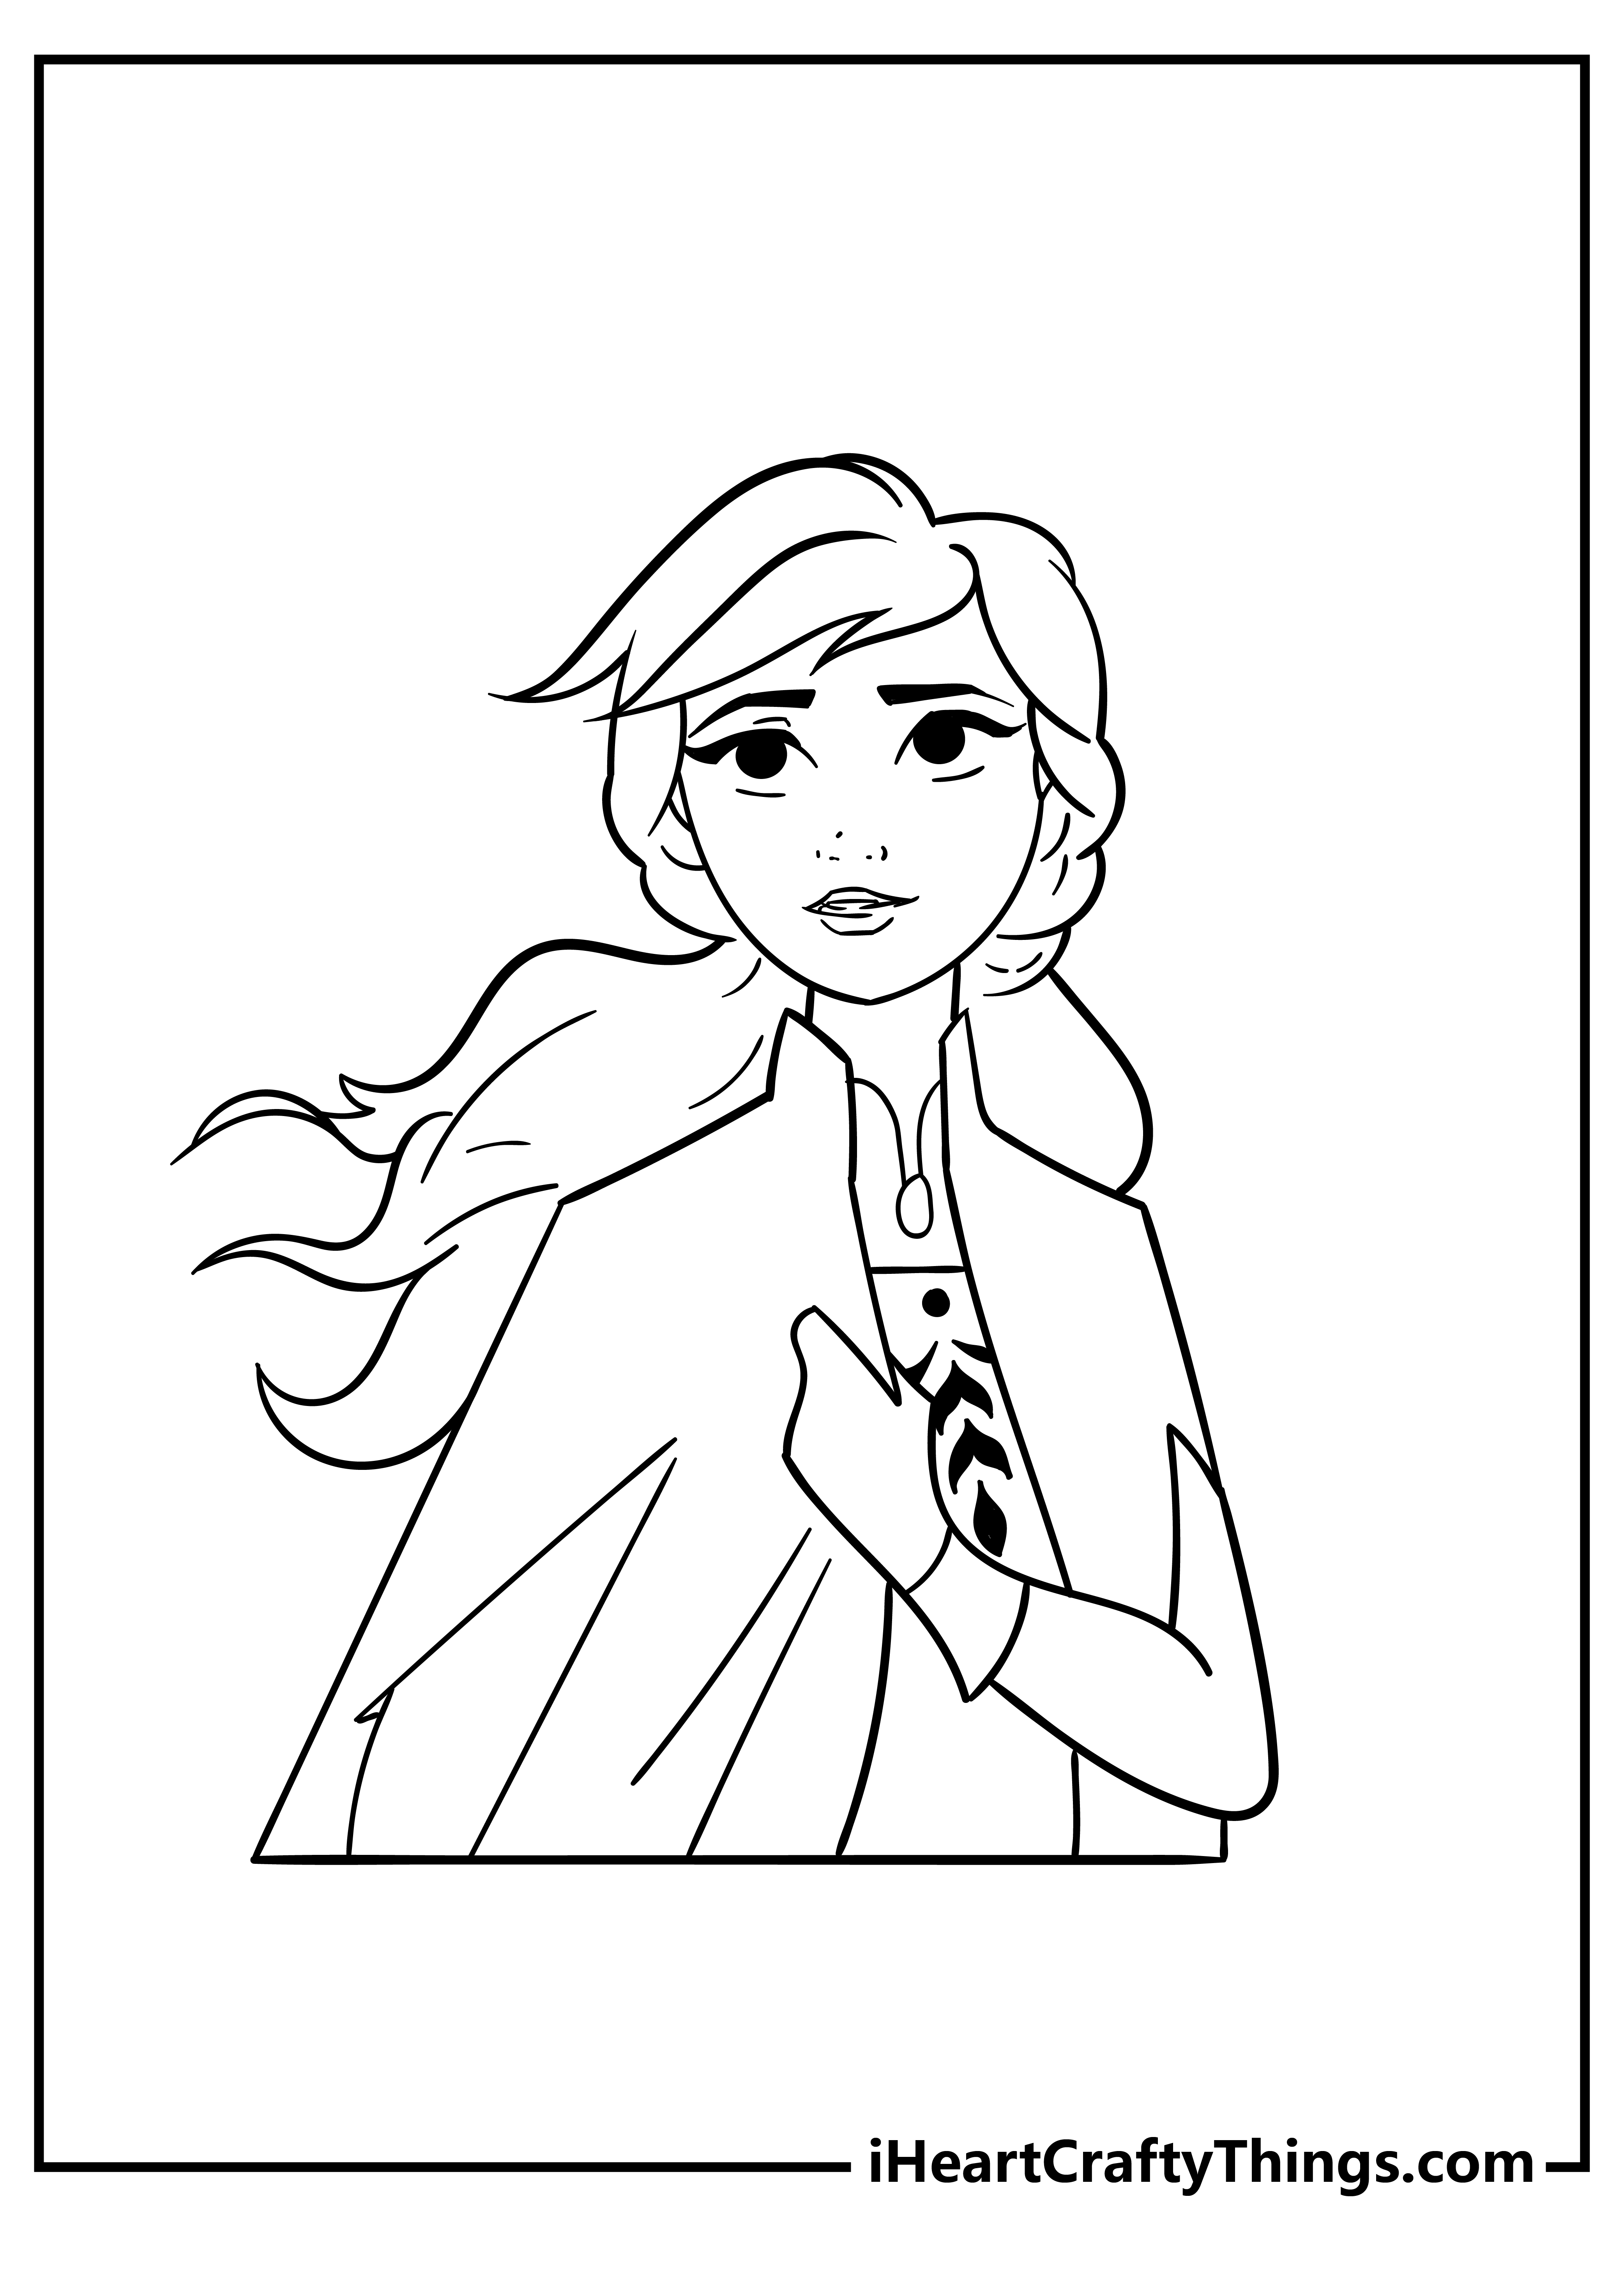 Elsa and Anna Coloring Book for adults free download